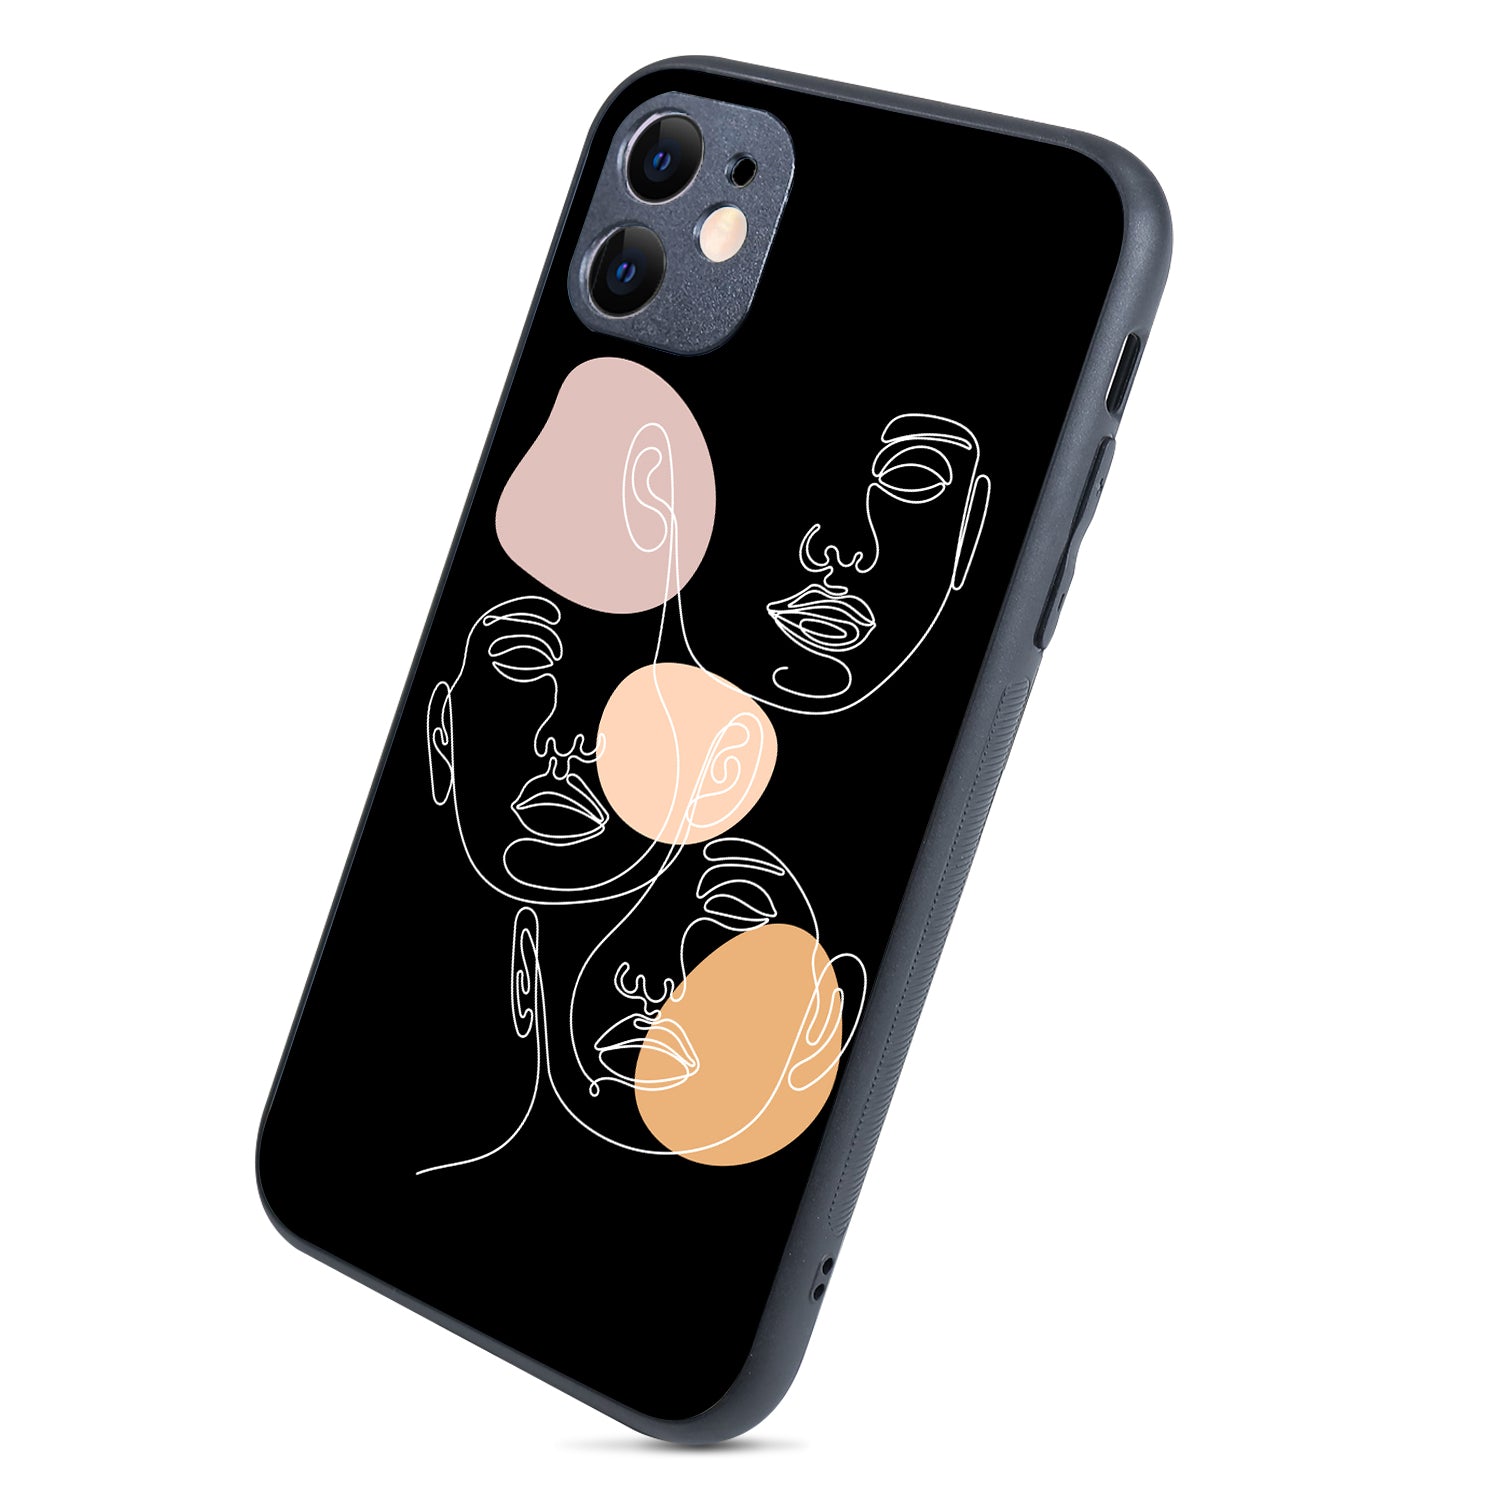 Face Aesthetic Human iPhone 11 Case